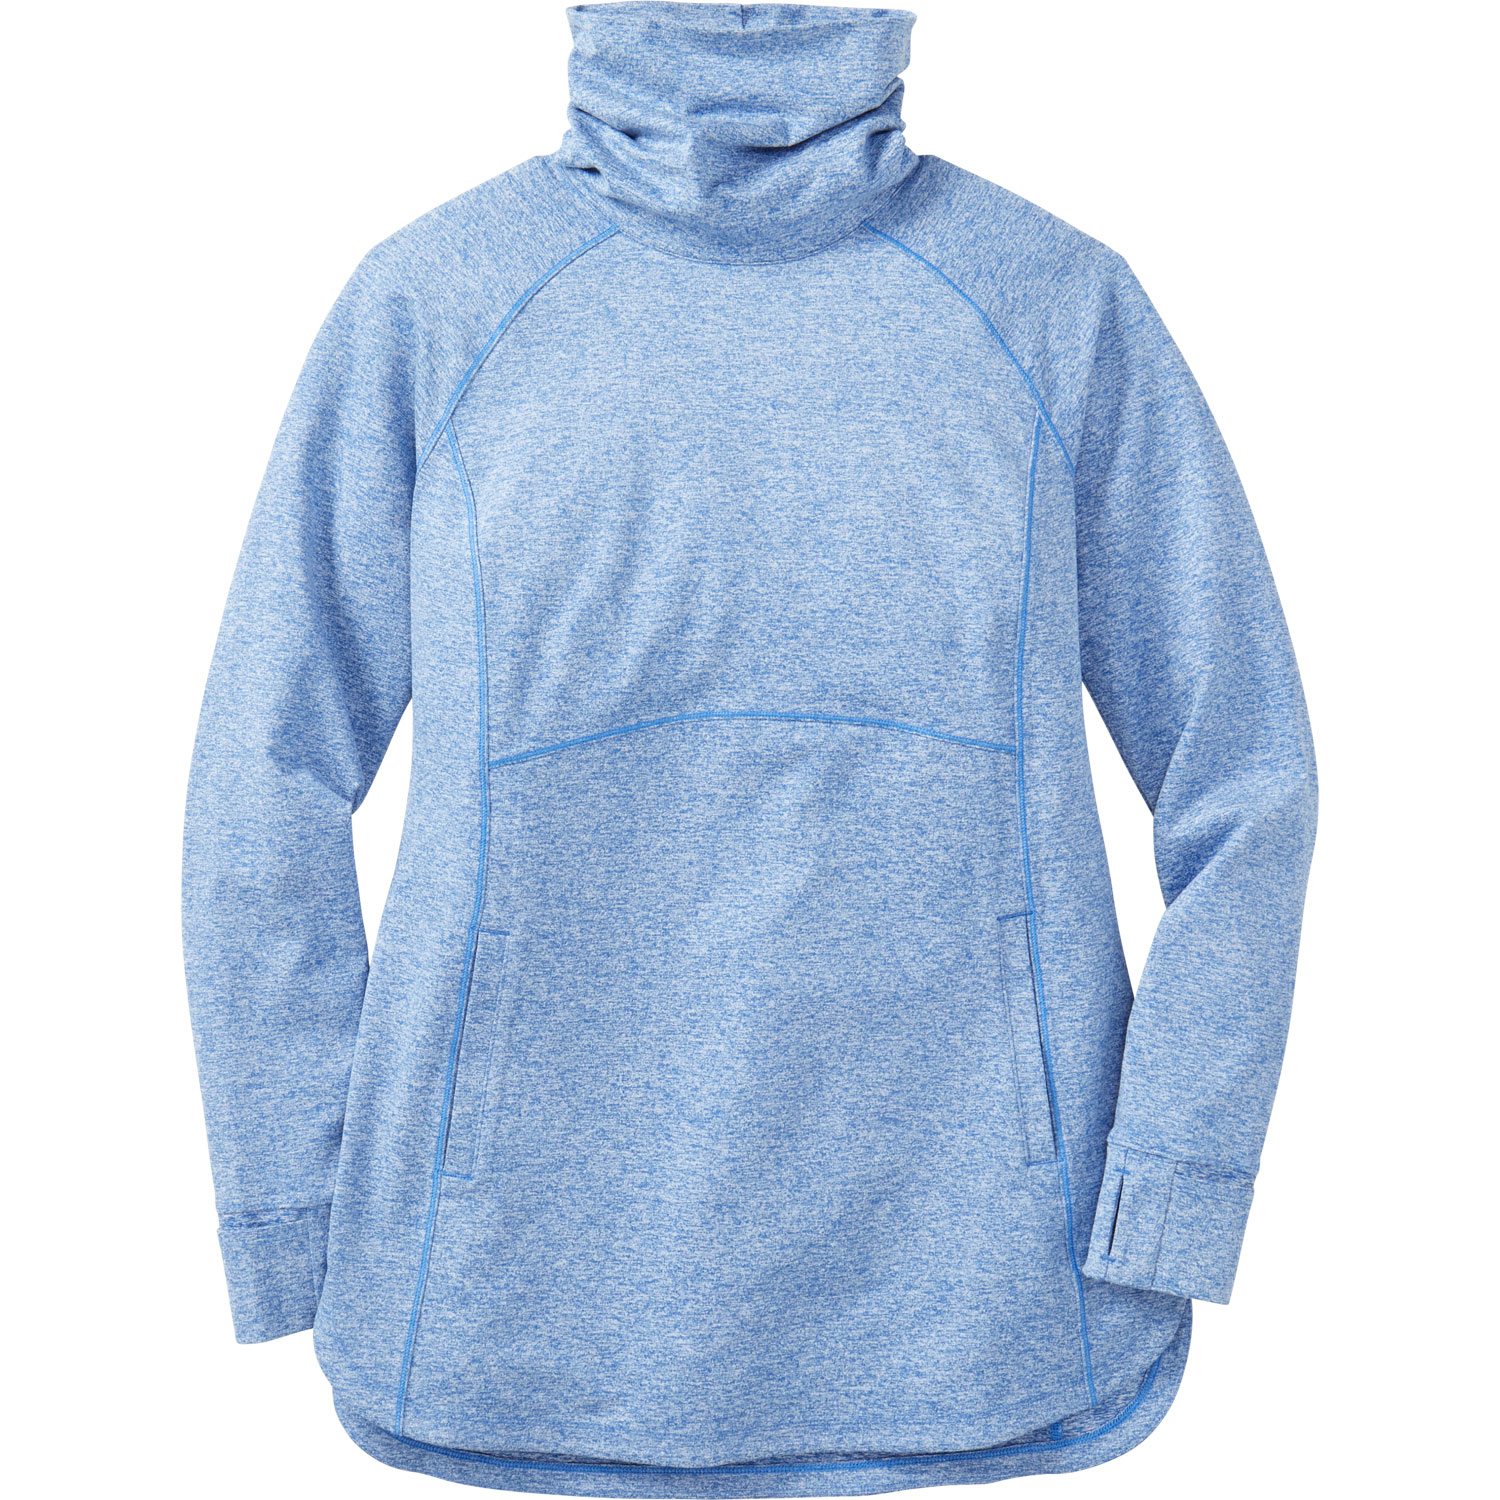 Women's Plushcious Funnelneck Tunic | Duluth Trading Company